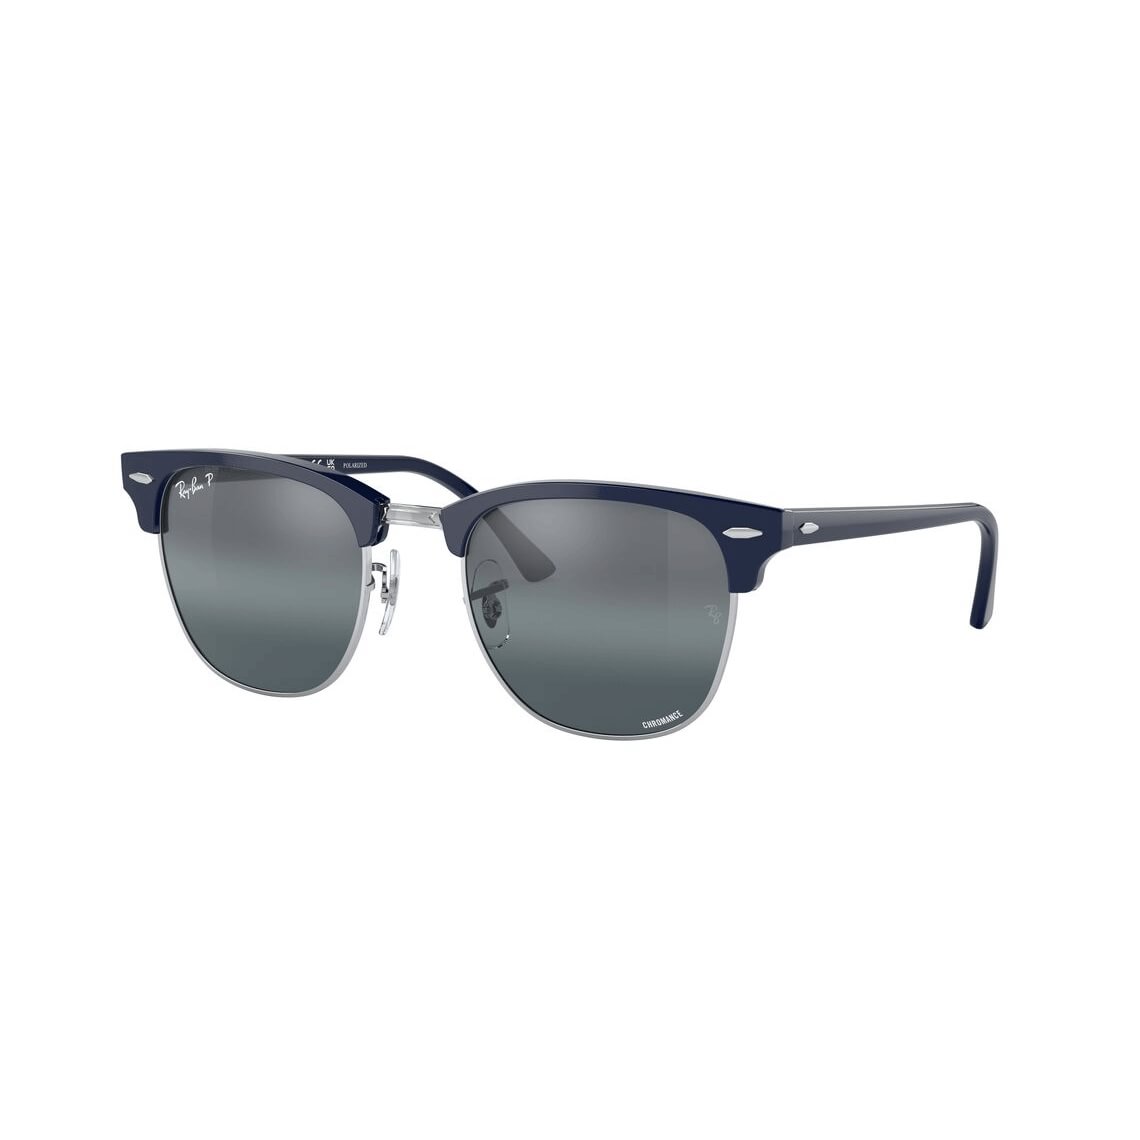 Ray-Ban Clubmaster RB3016 1366G6 4921